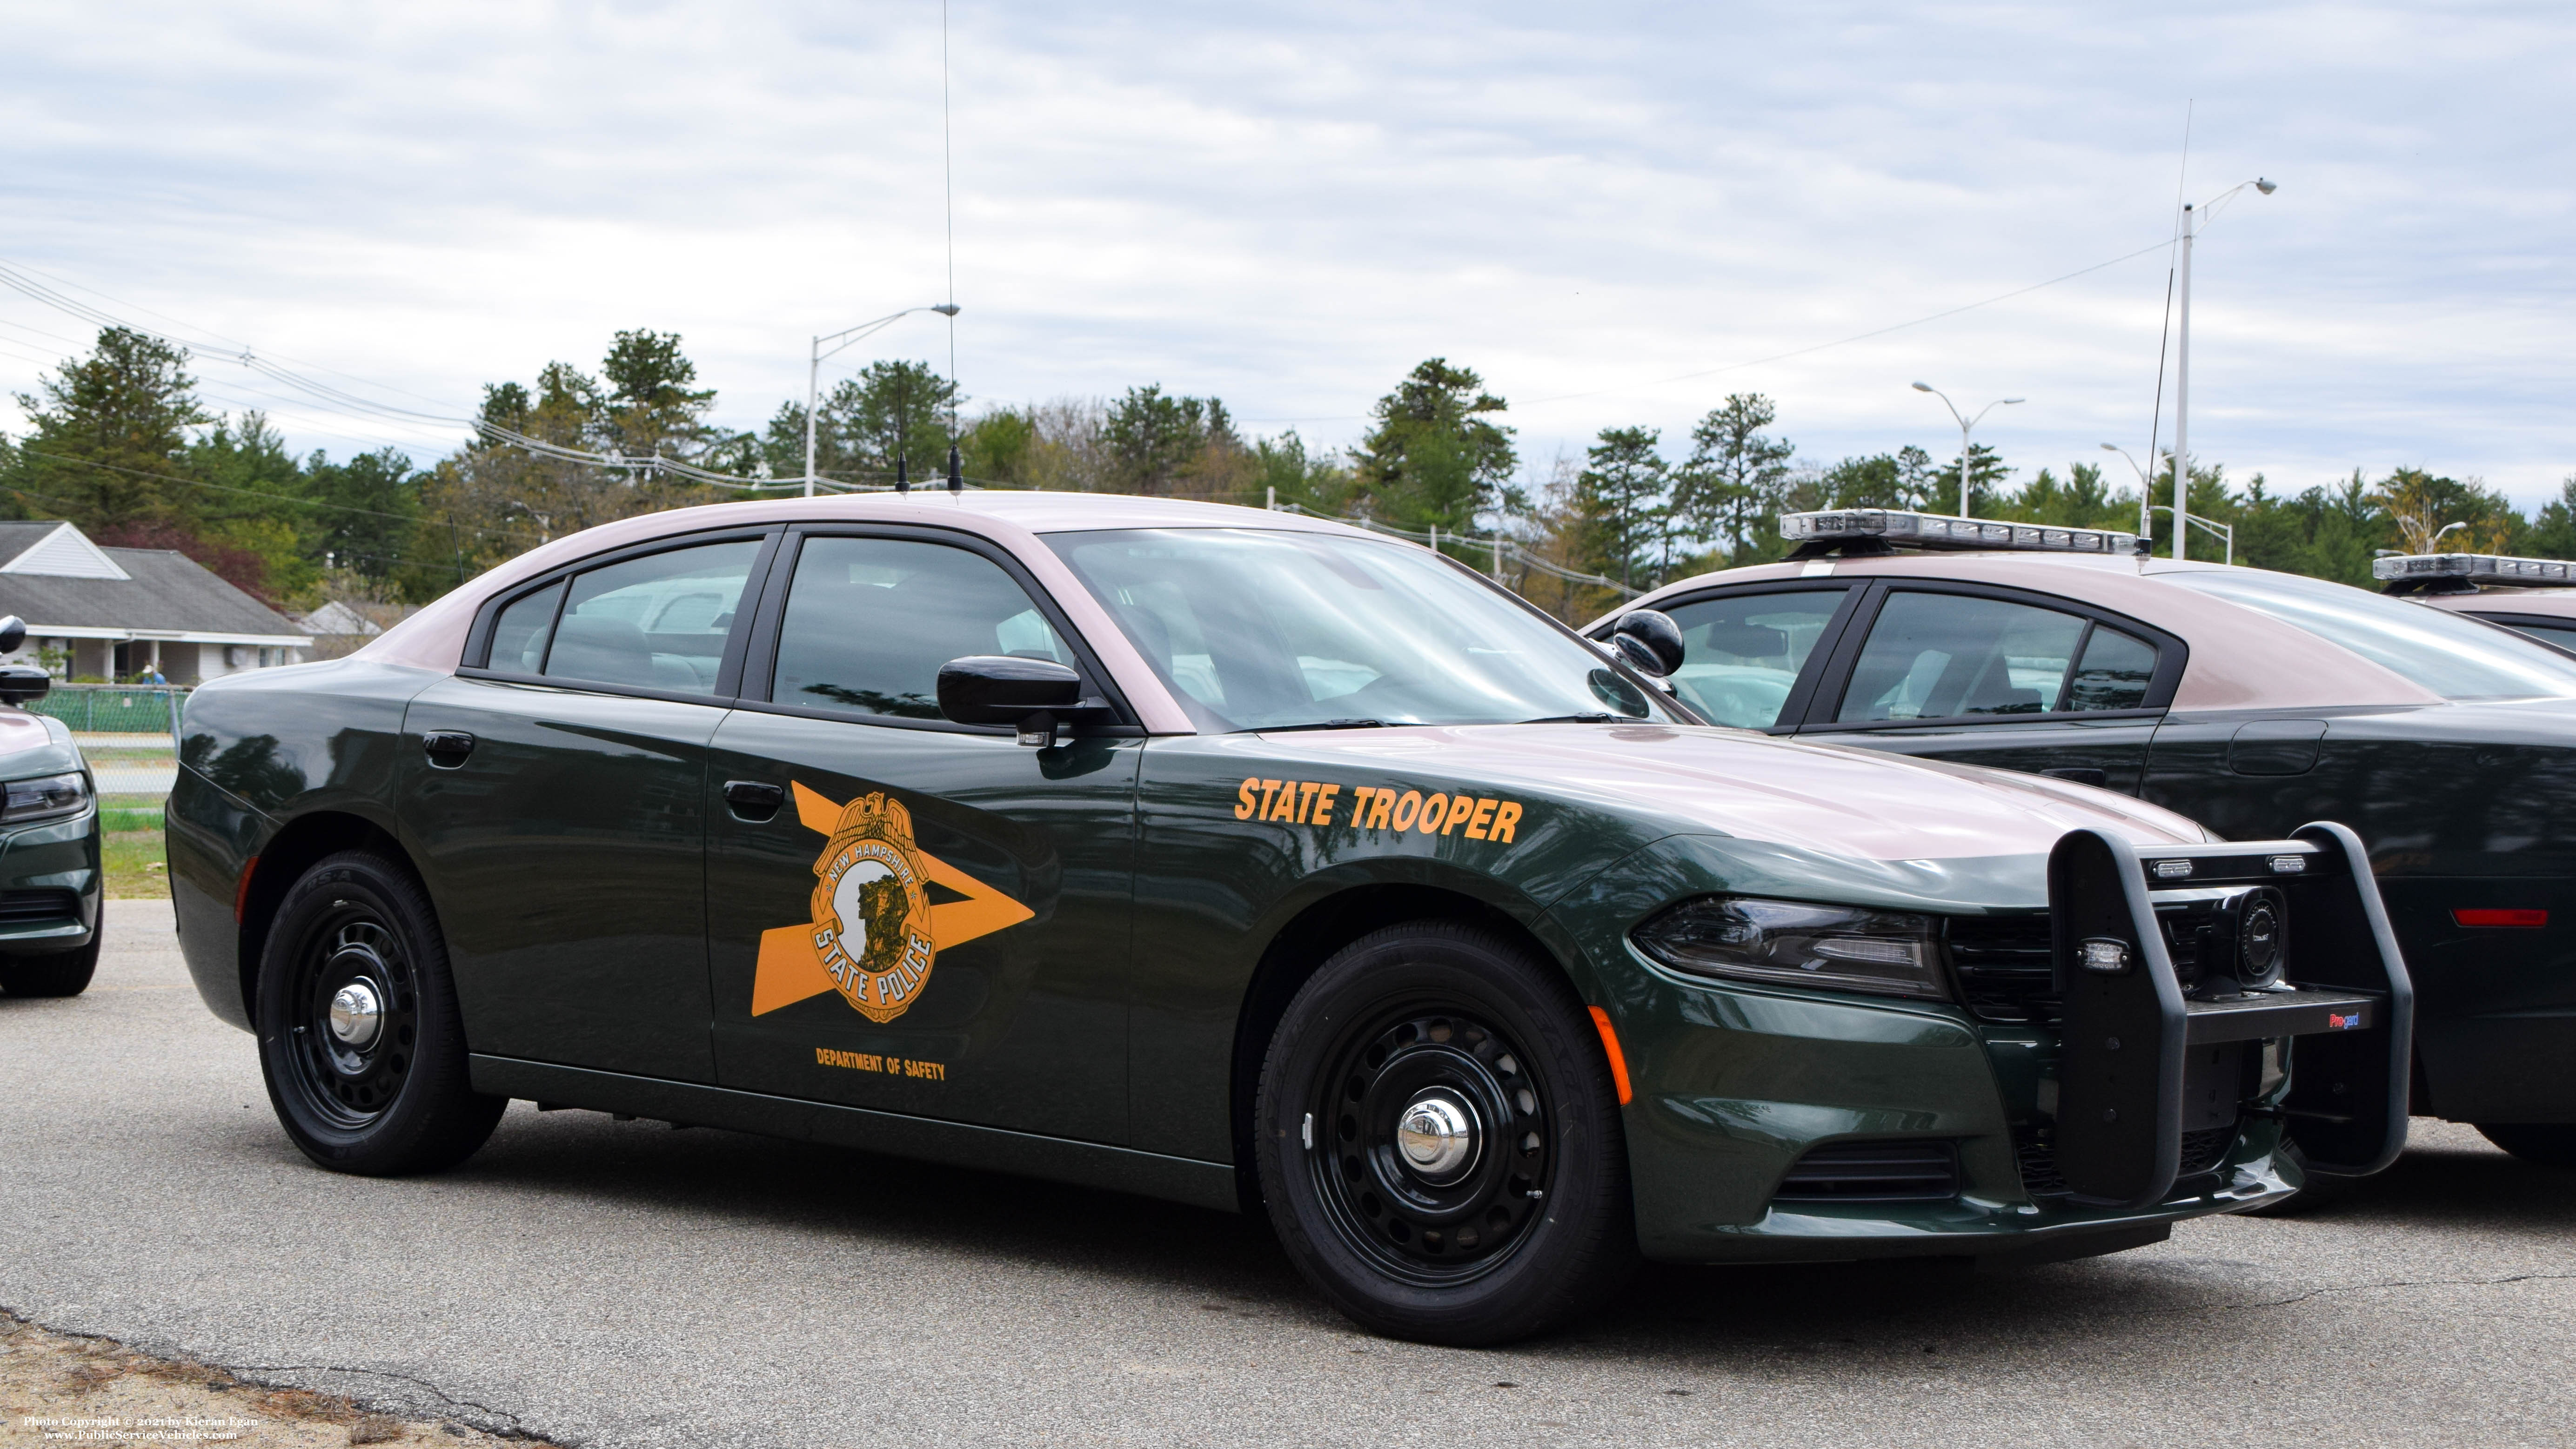 A photo  of New Hampshire State Police
            Cruiser 216, a 2020 Dodge Charger             taken by Kieran Egan